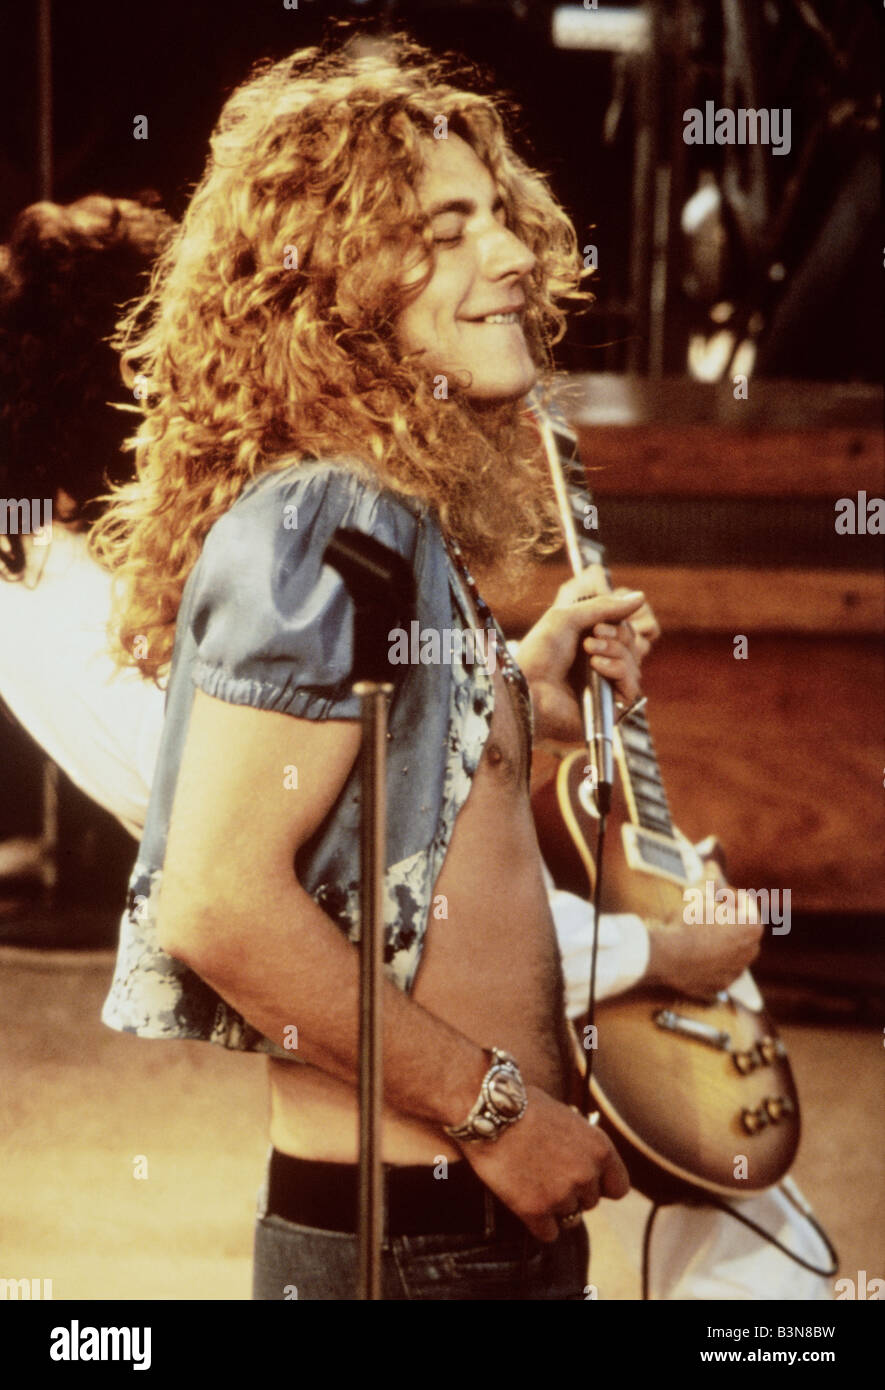 LED ZEPPELIN UK rock group with Robert Plant lead singer about 1976 Stock  Photo - Alamy